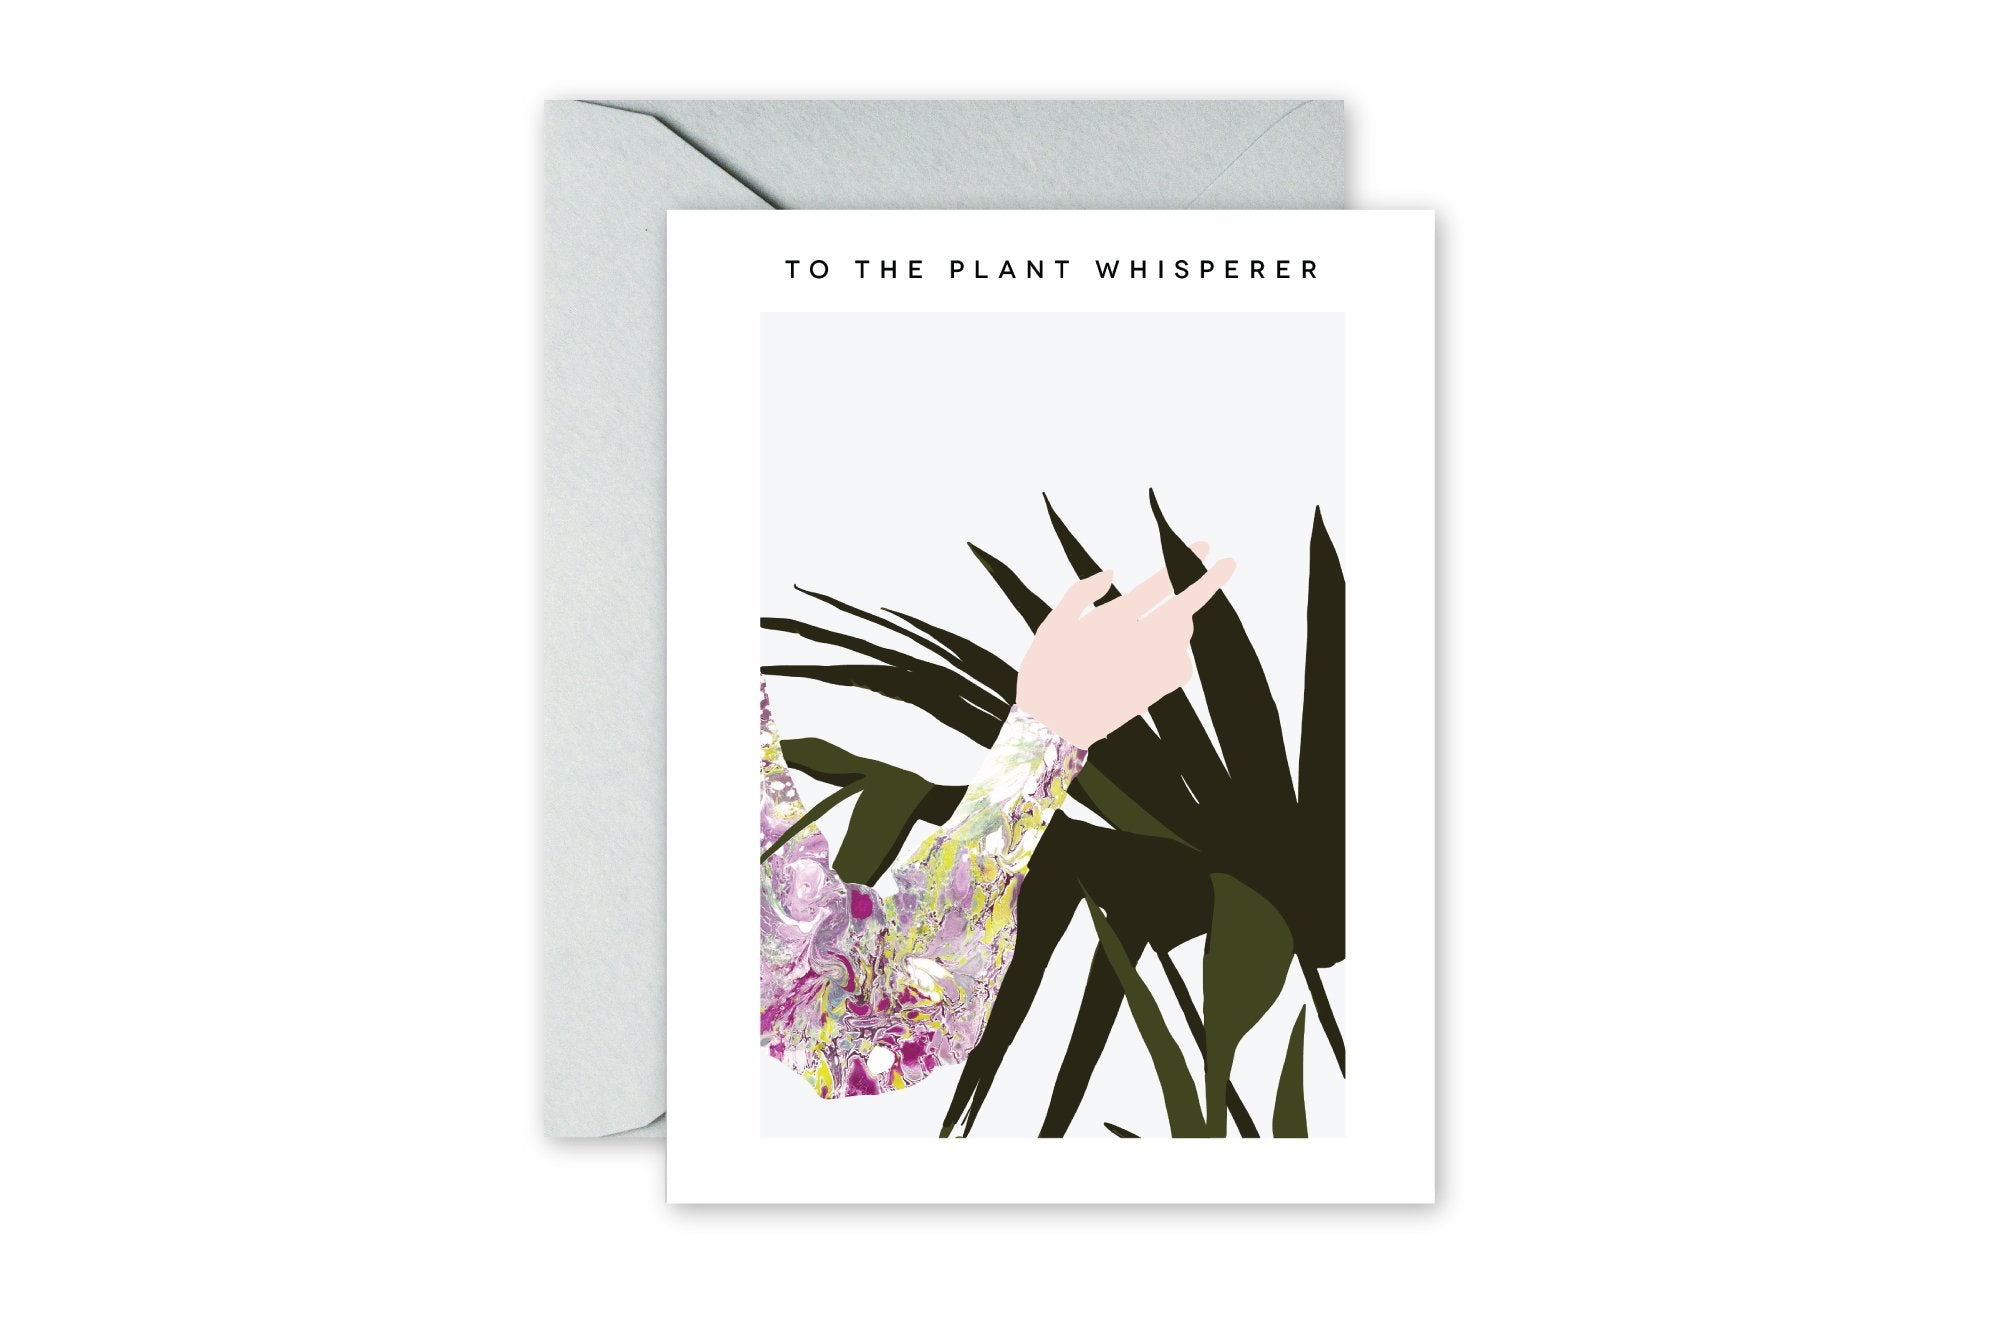 TO THE PLANT WHISPERER greeting card